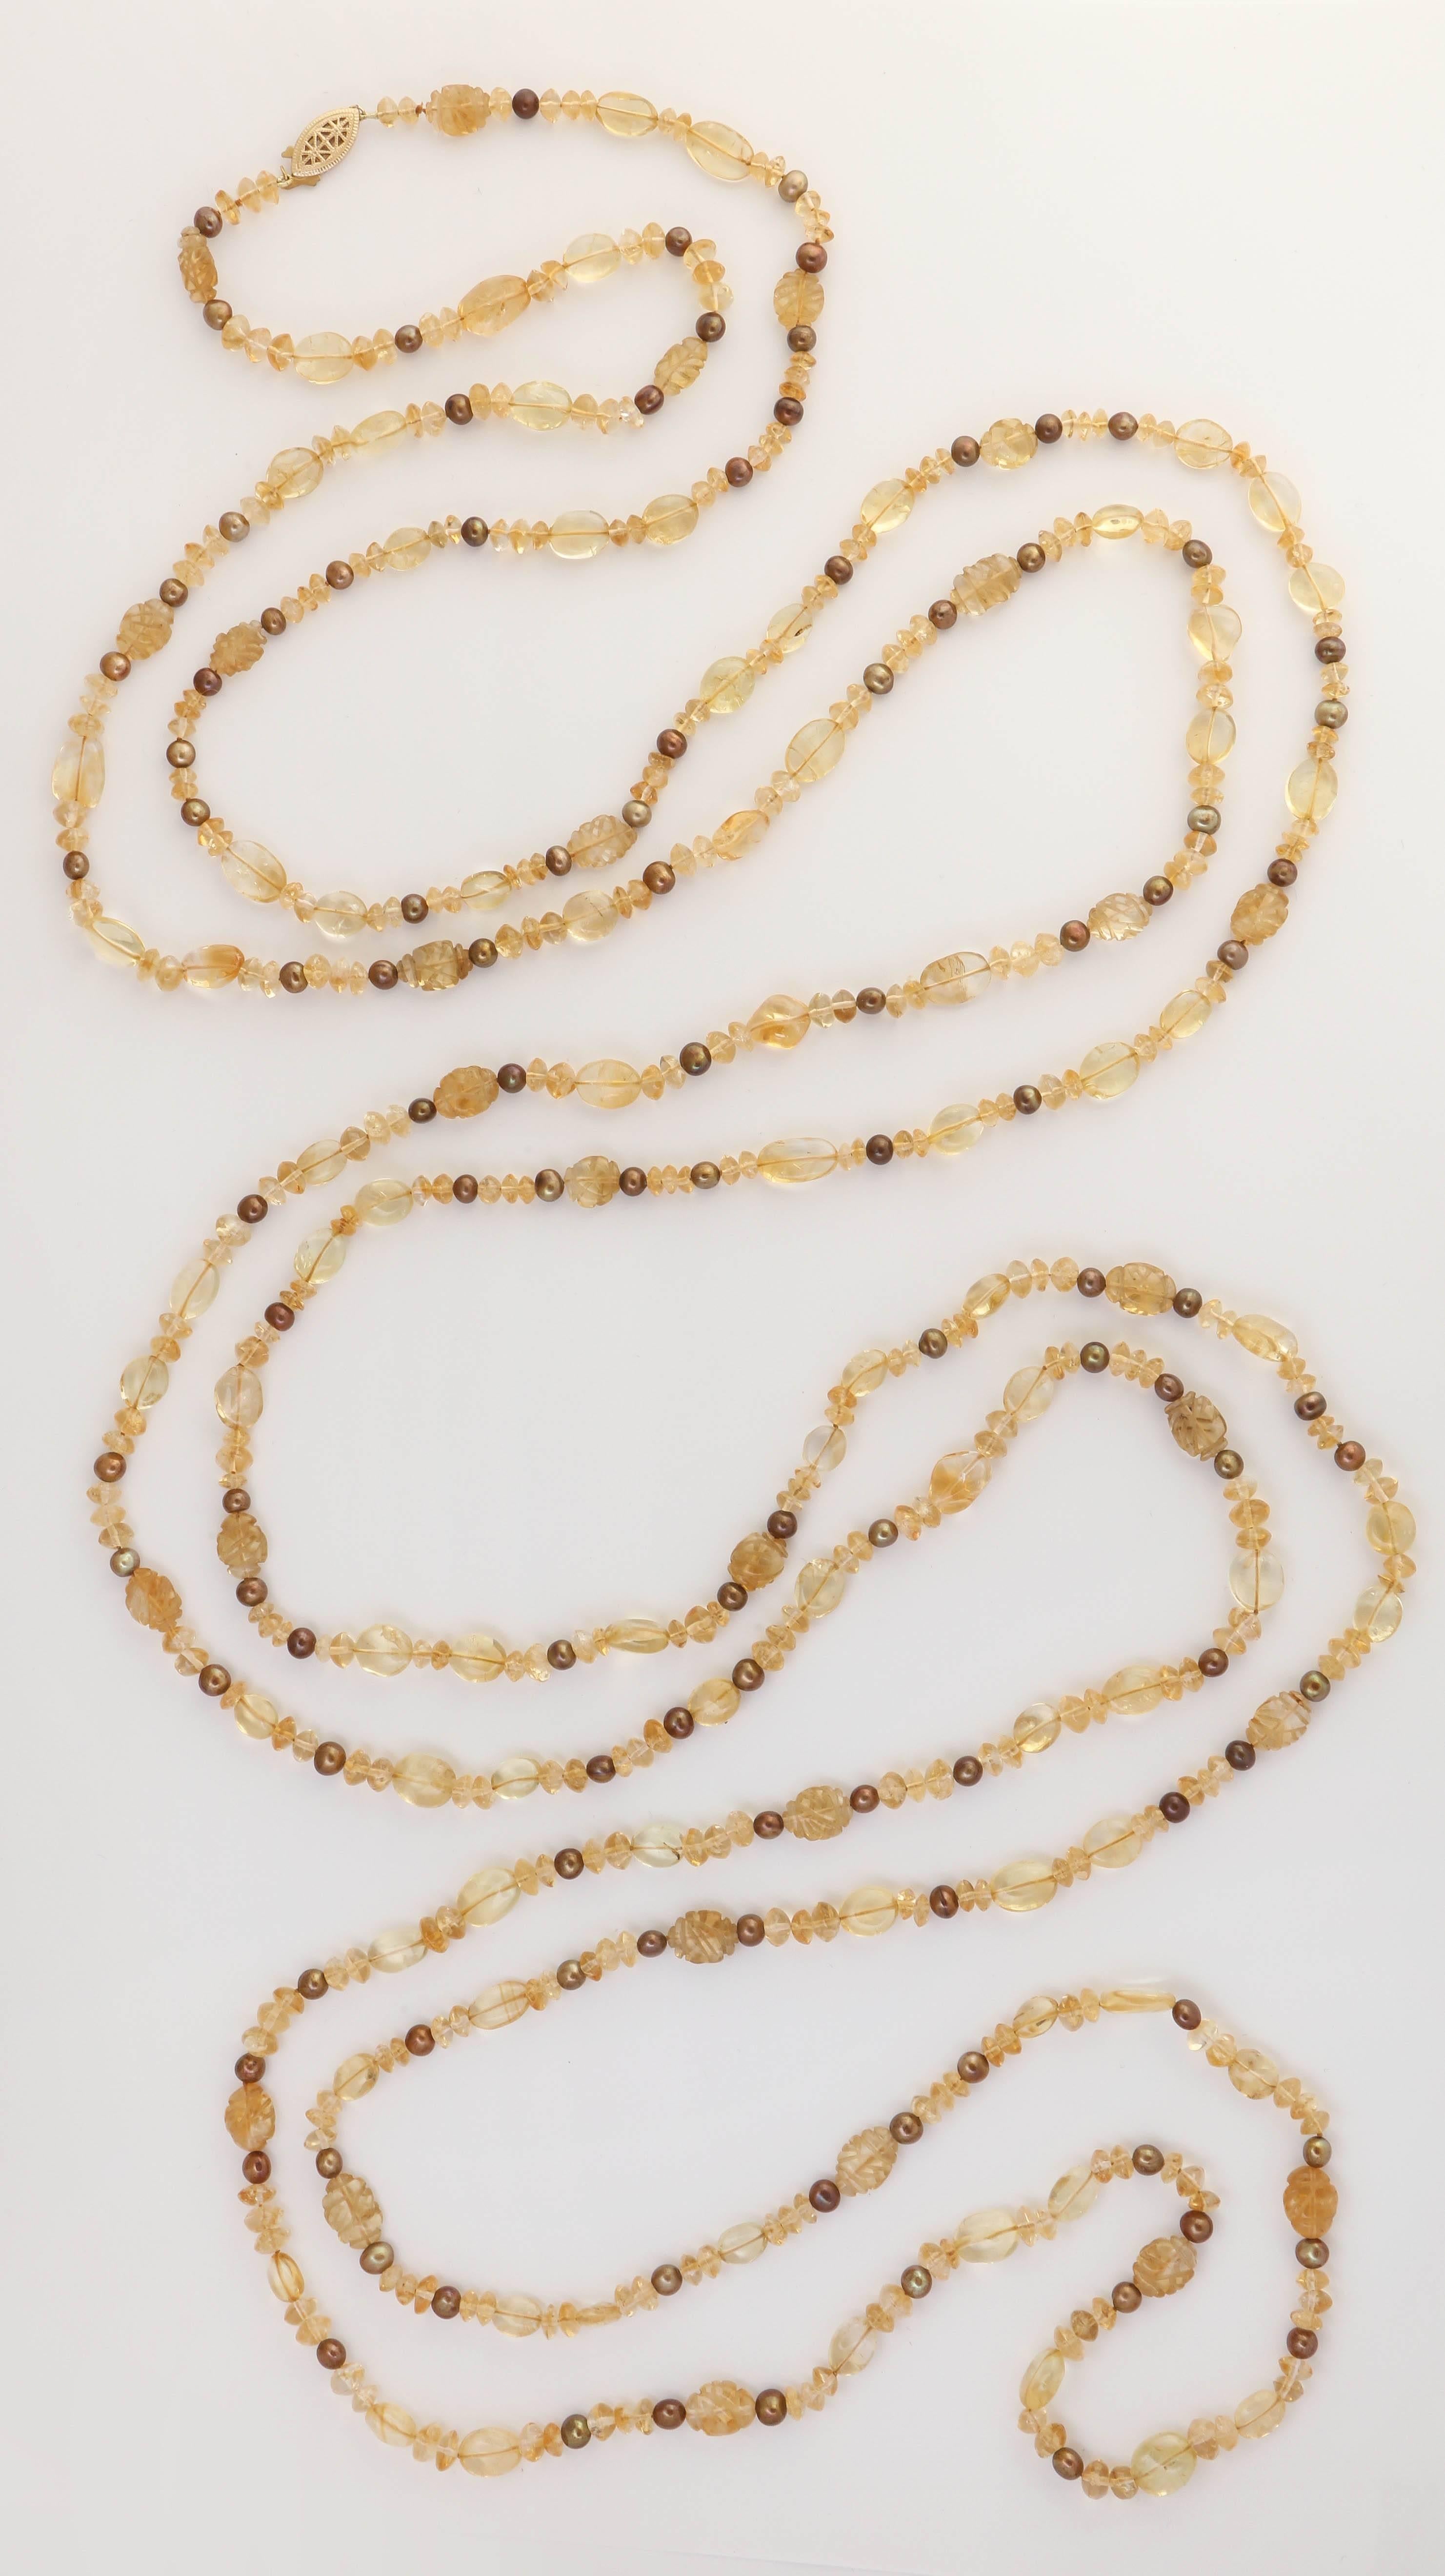 This is a very versatile necklace that can be worn many ways. There are a variety of shapes in the citrine beads, carved, oval, button shape, then interspersed with brown fresh water pearls. The necklace is finished with a 14 kt marquise clasp.